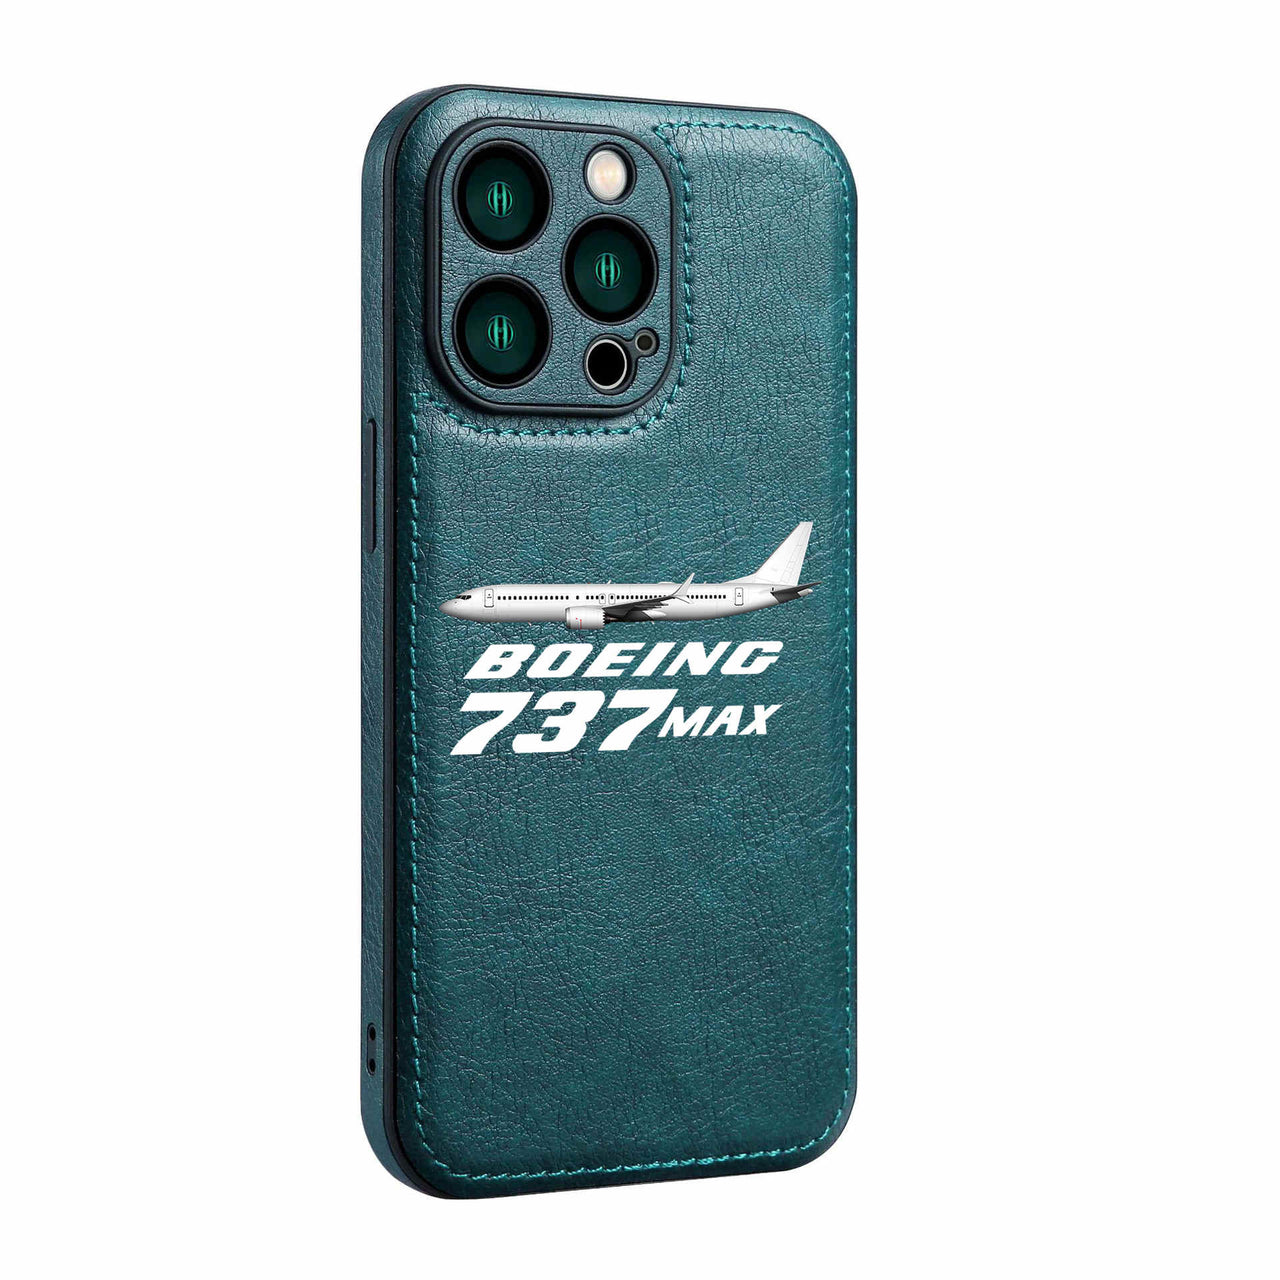 The Boeing 737Max Designed Leather iPhone Cases